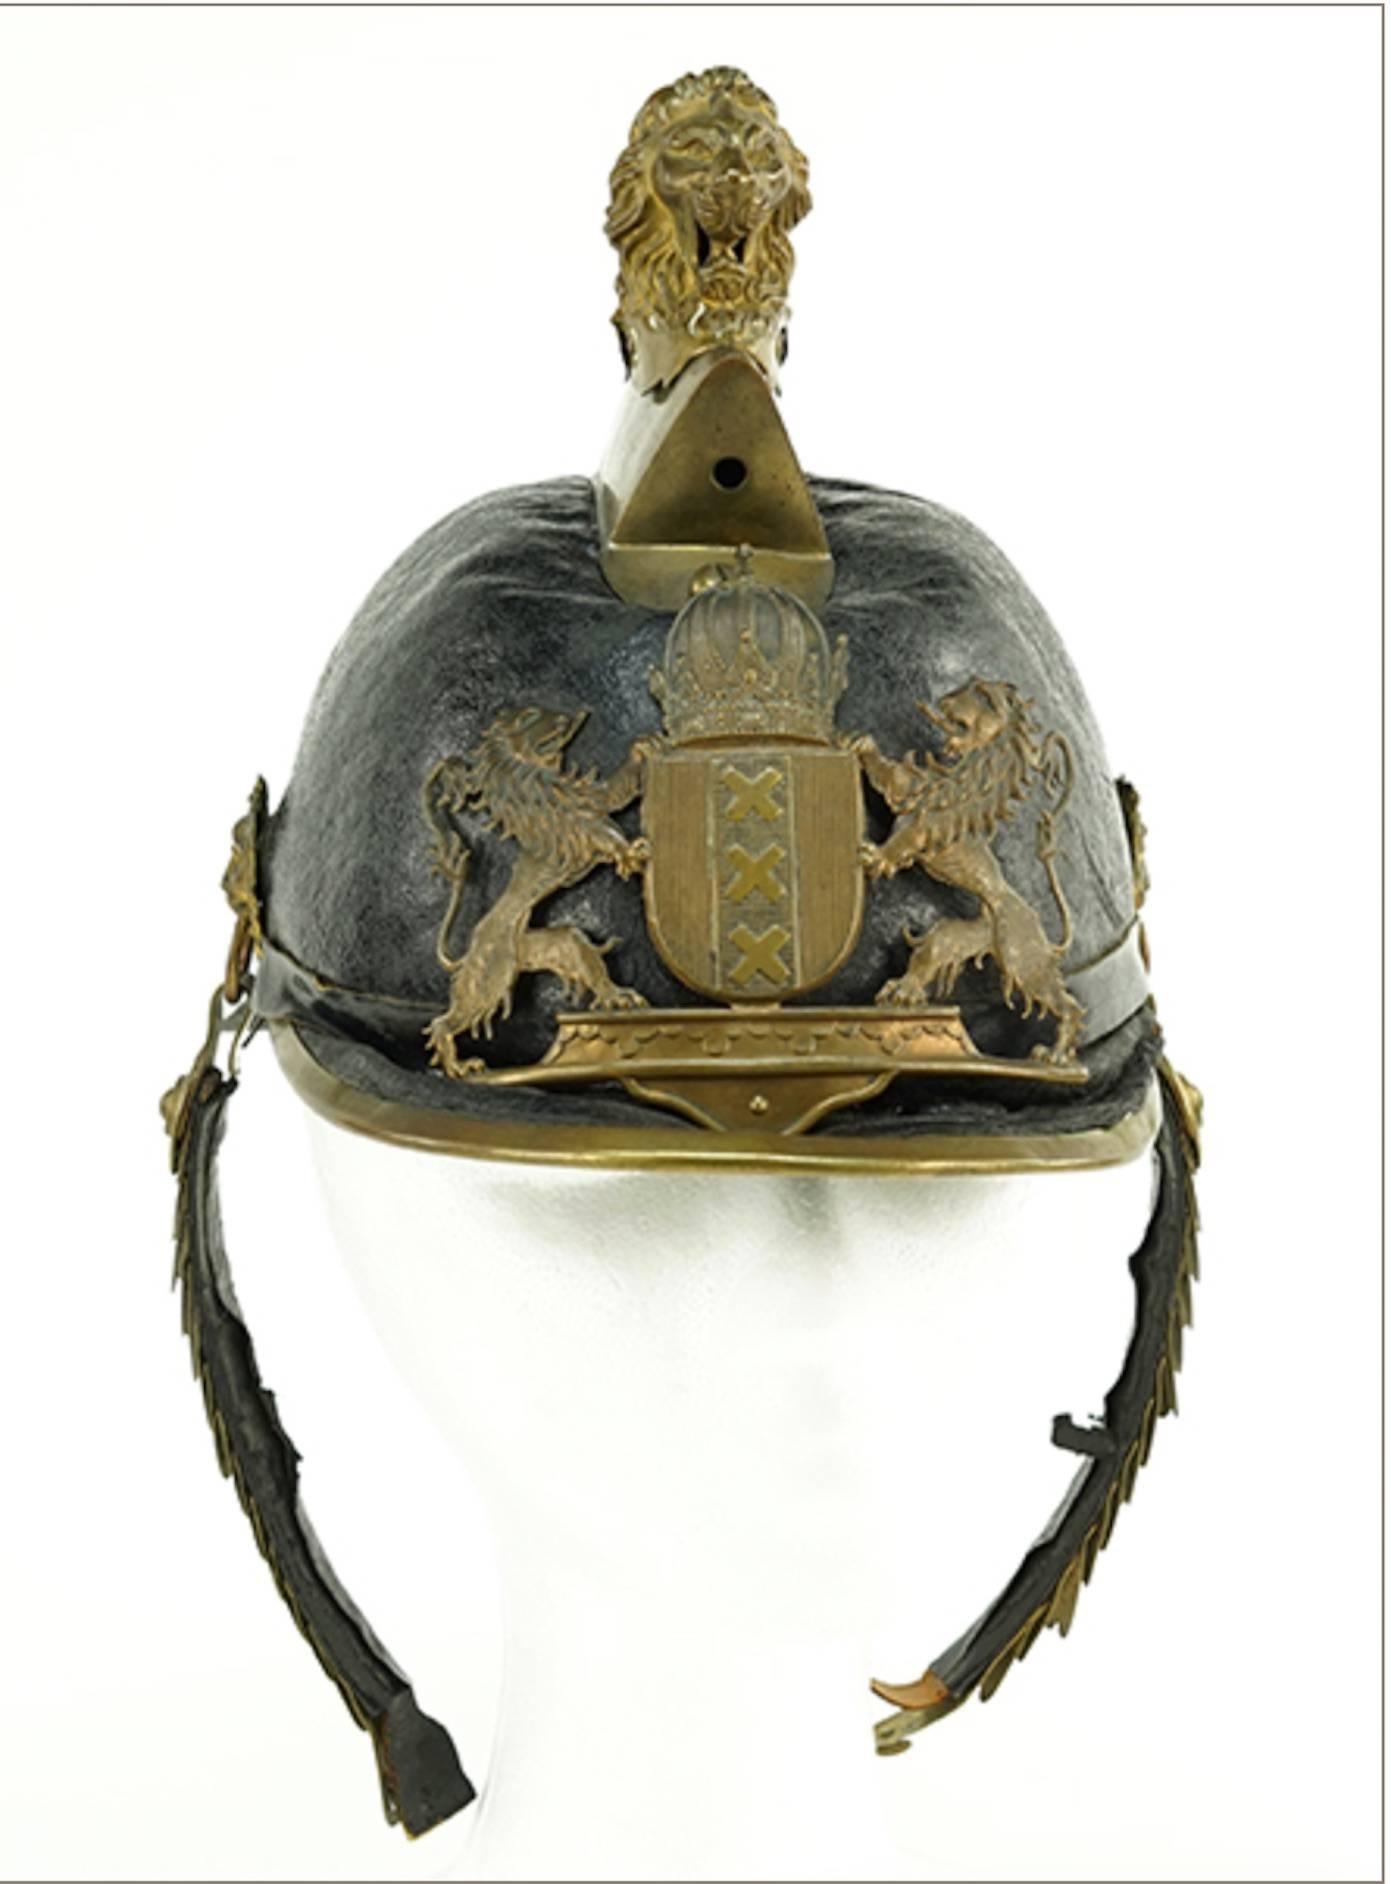 Two 19th century Austrian parade pickle helmets. Letter with gilt metal mounts.